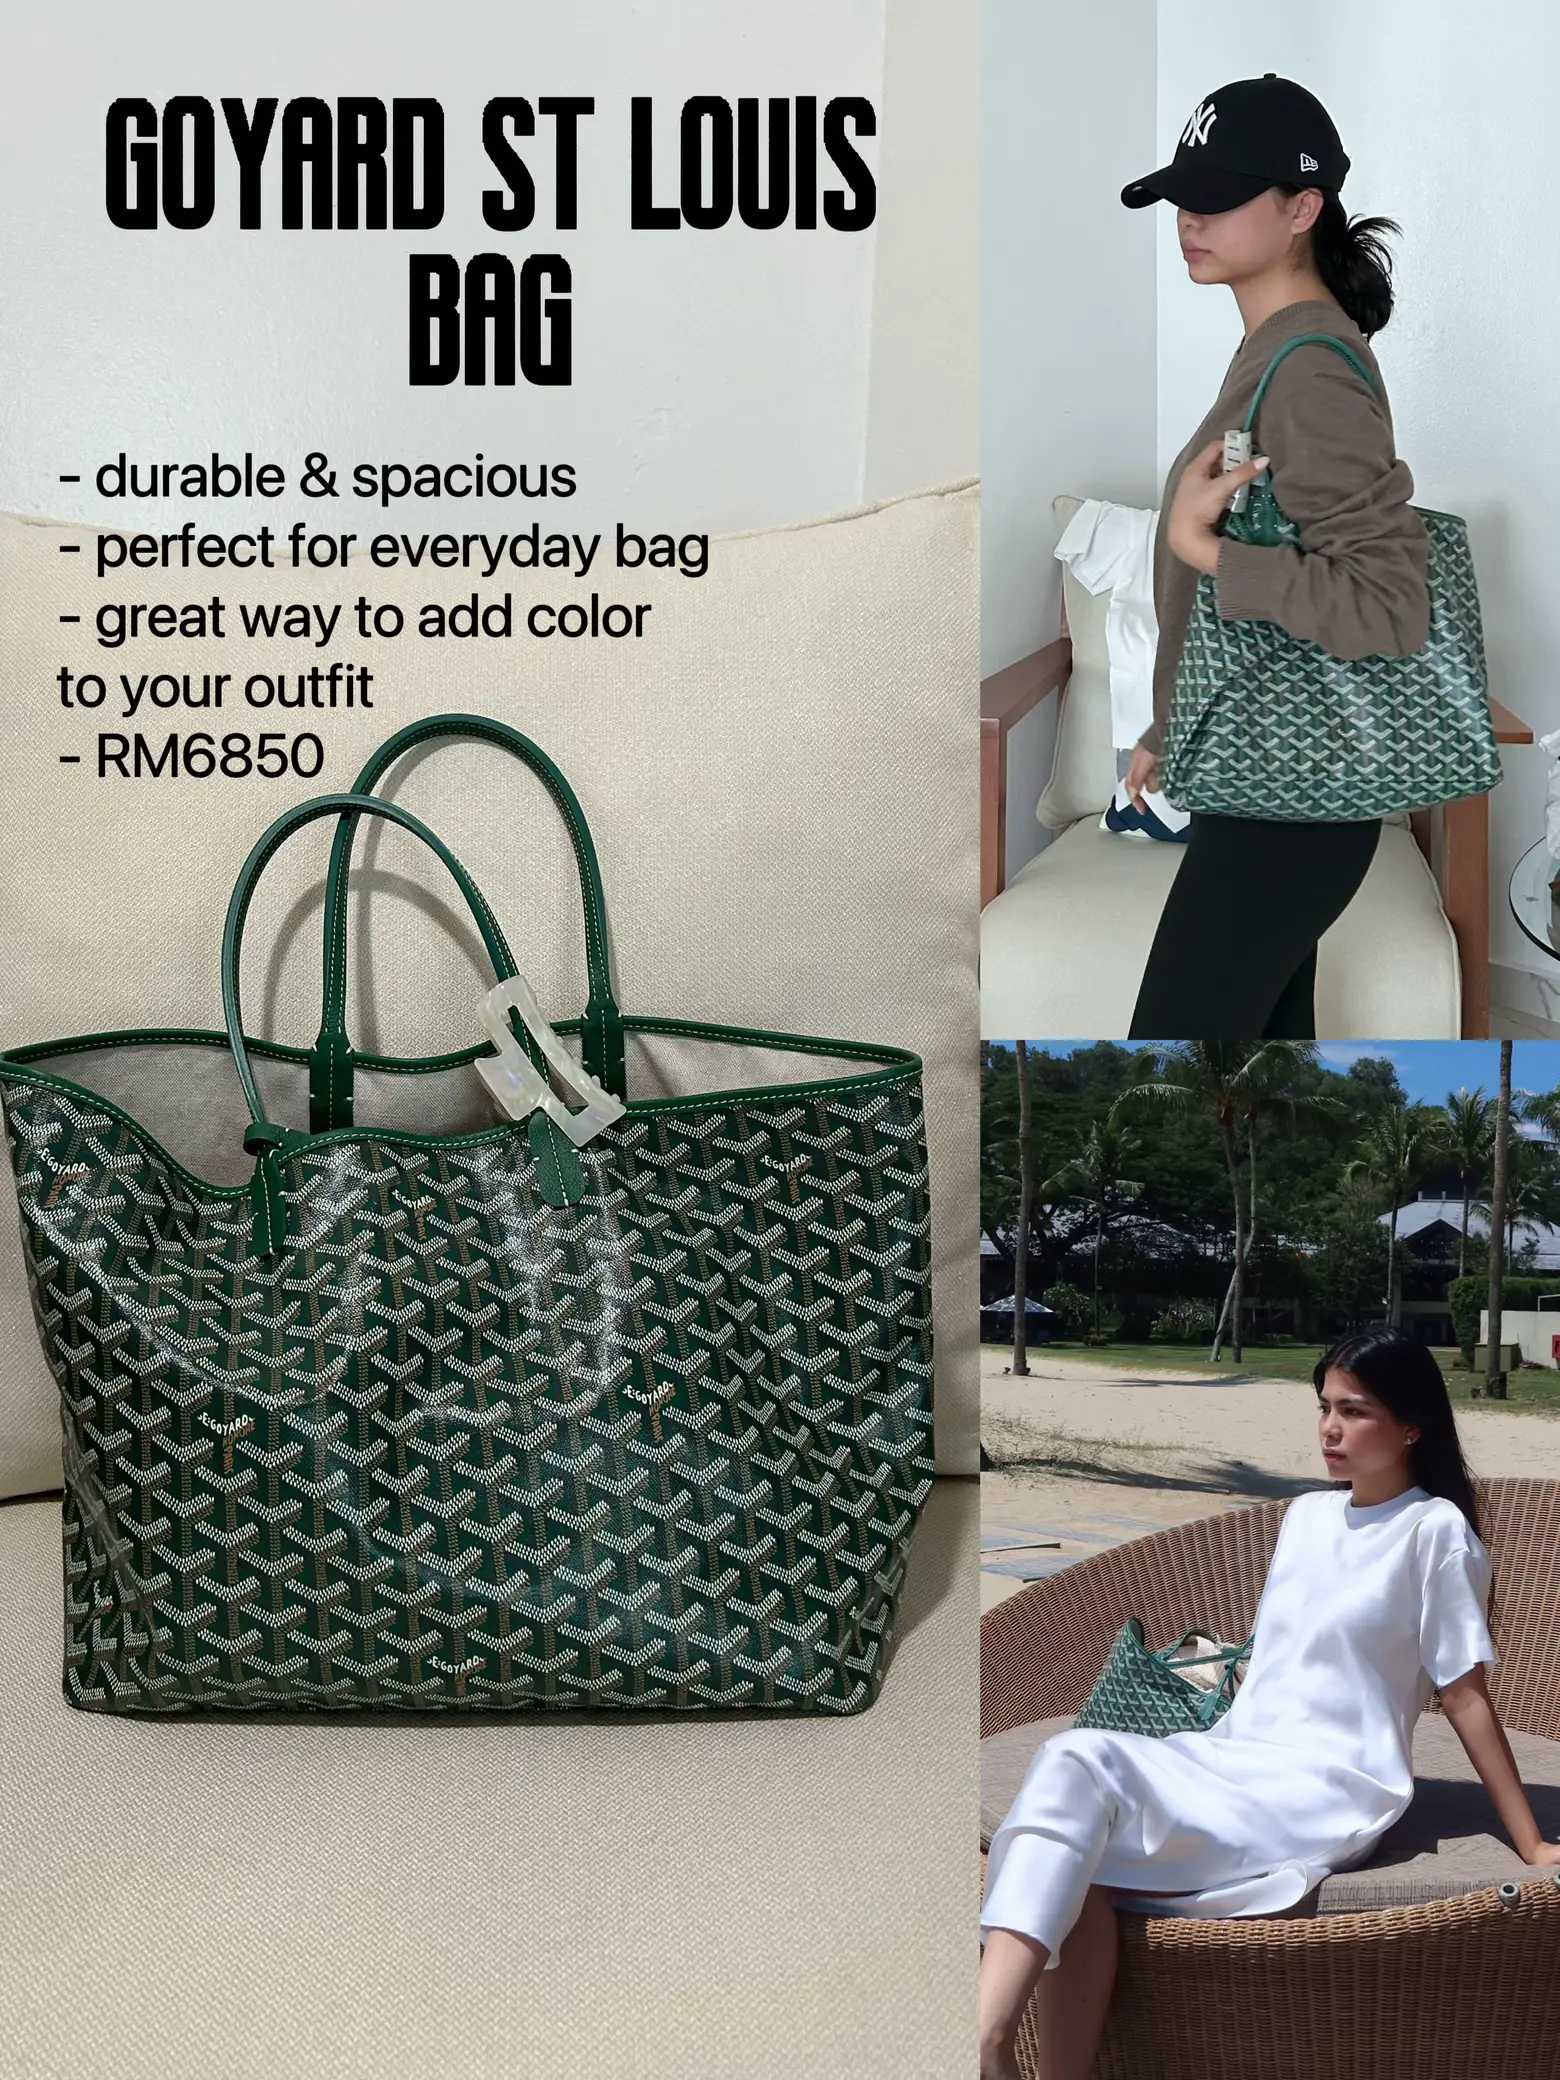 BEST PURCHASE OF 2022, HANDBAG EDITION, Gallery posted by Faznadia